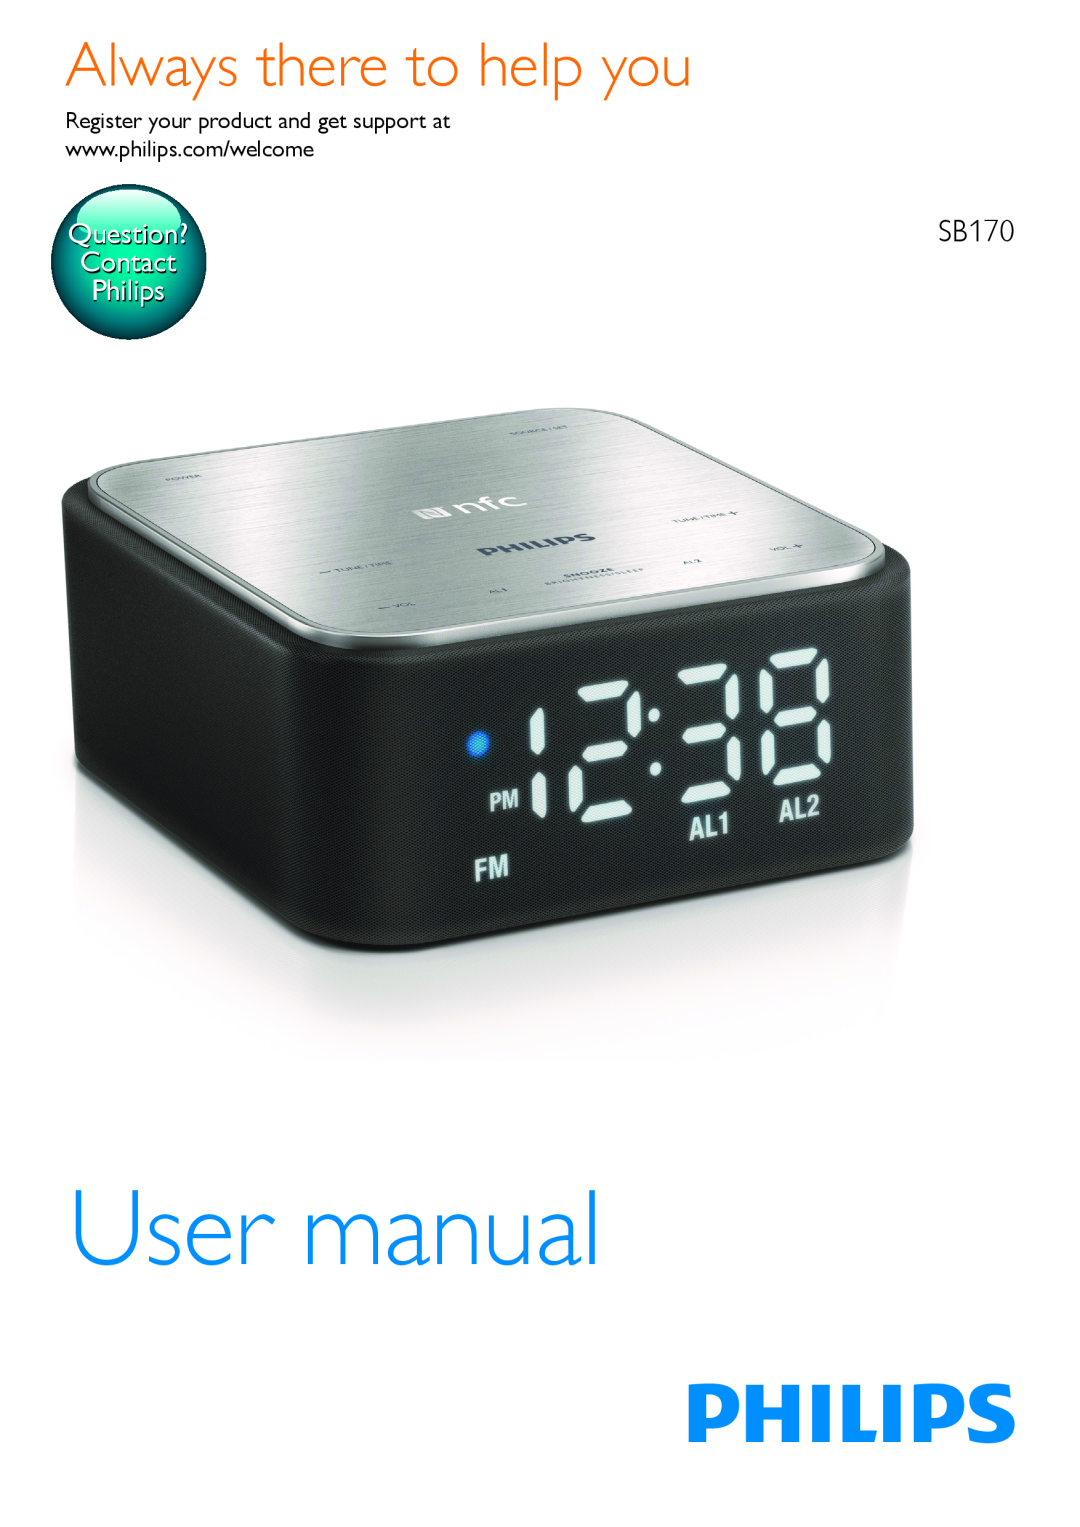 Philips SB170 user manual User manual, Always there to help you, Contact, Question?, Philips 